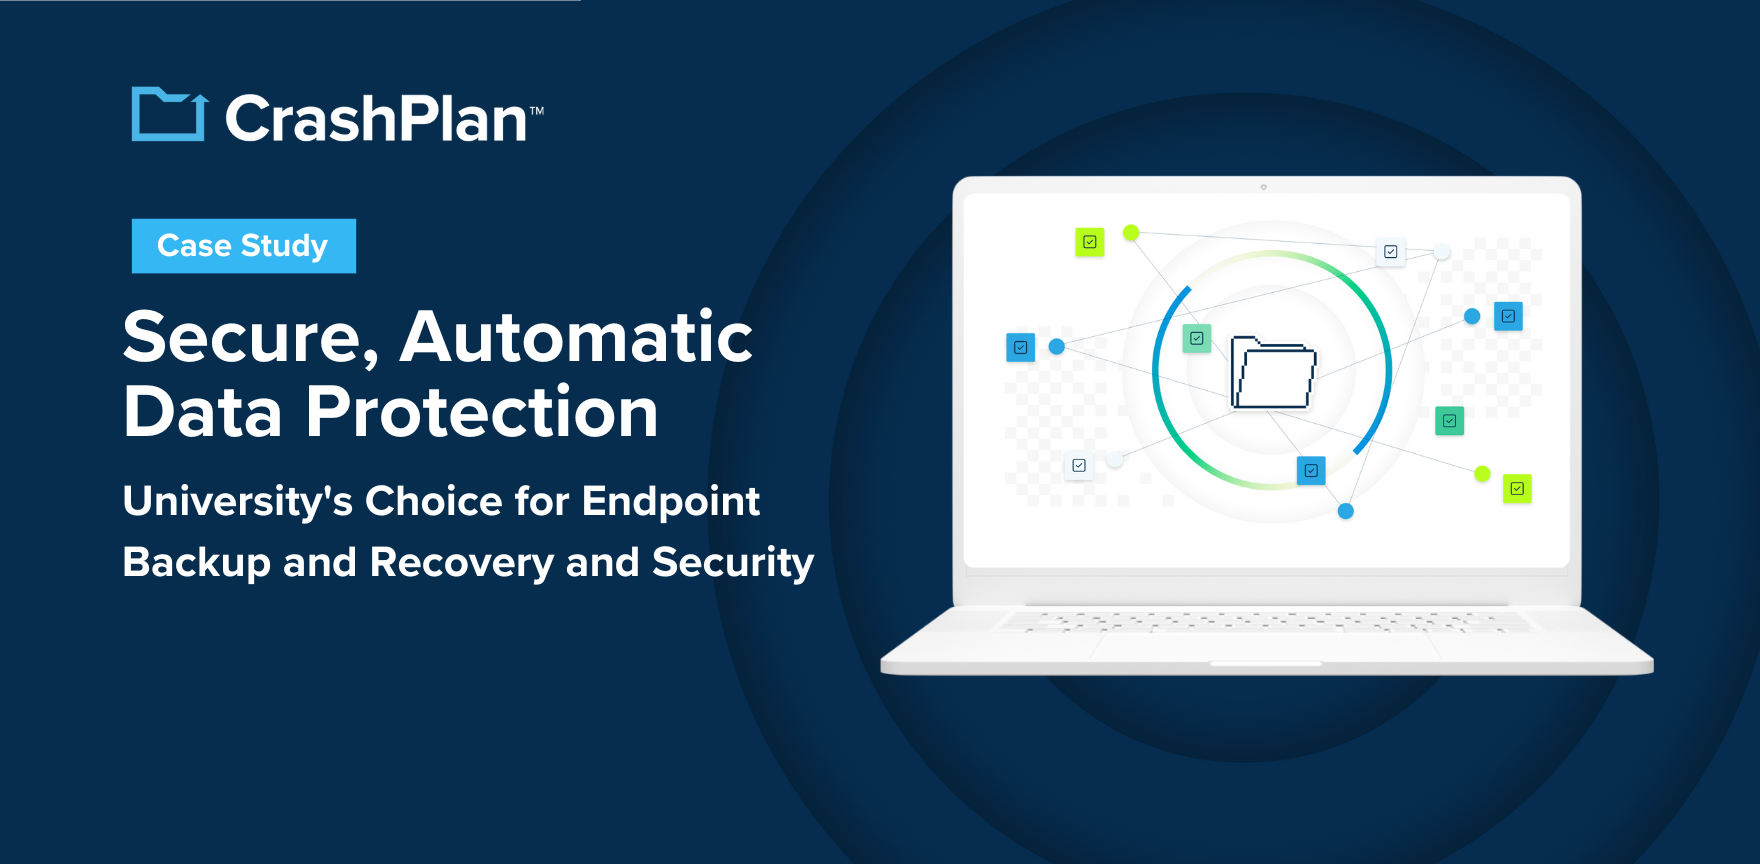 Case study banner that highlights CrashPlan's endpoint cloud backup solutions that offer secure automatic protection